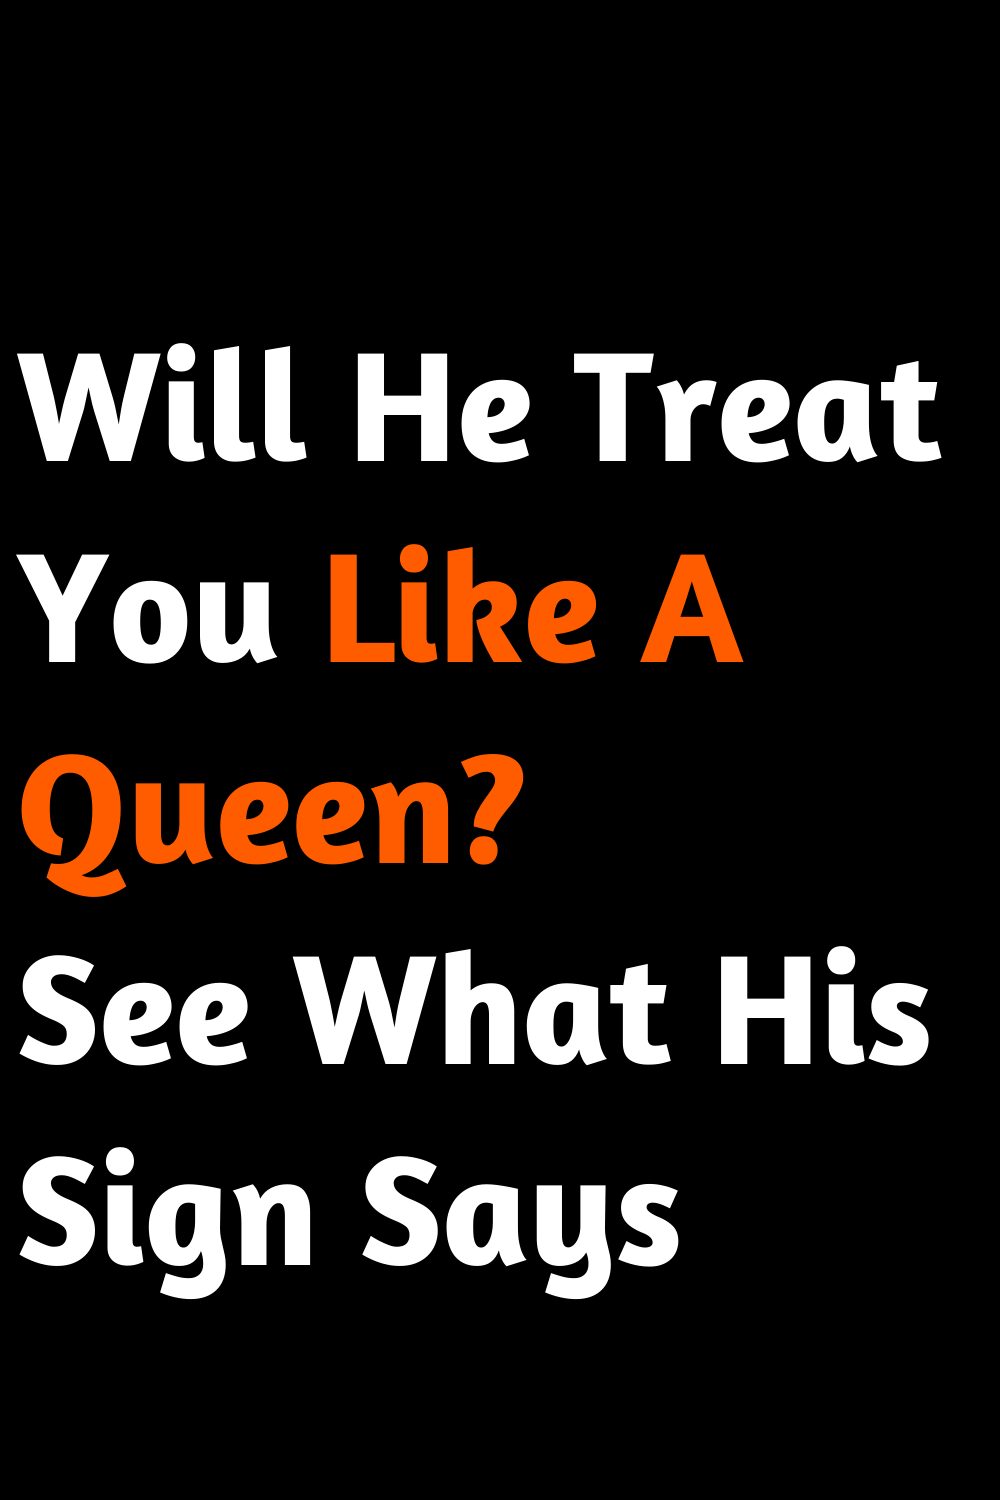 Will He Treat You Like A Queen? See What His Sign Says